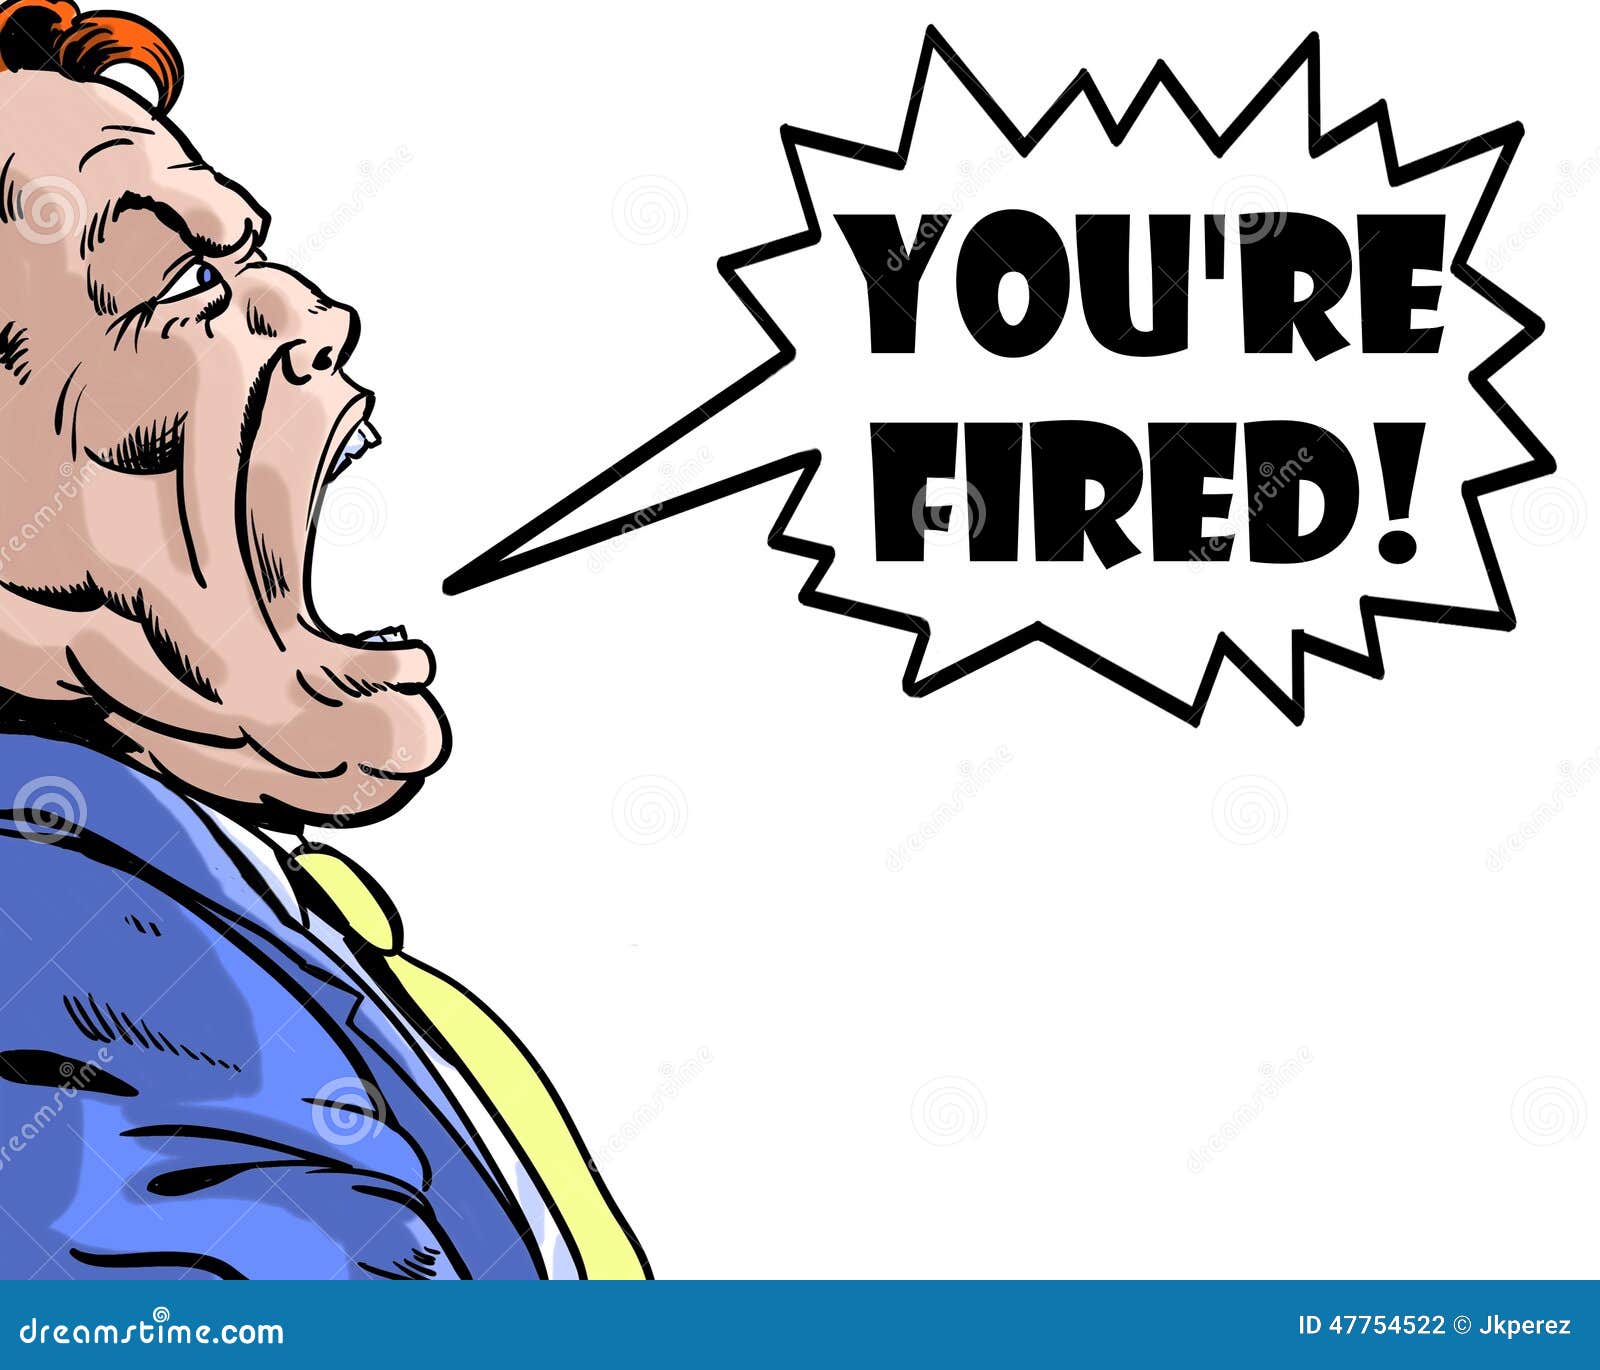 Collection 90+ Images can you be fired for yelling at your boss Completed